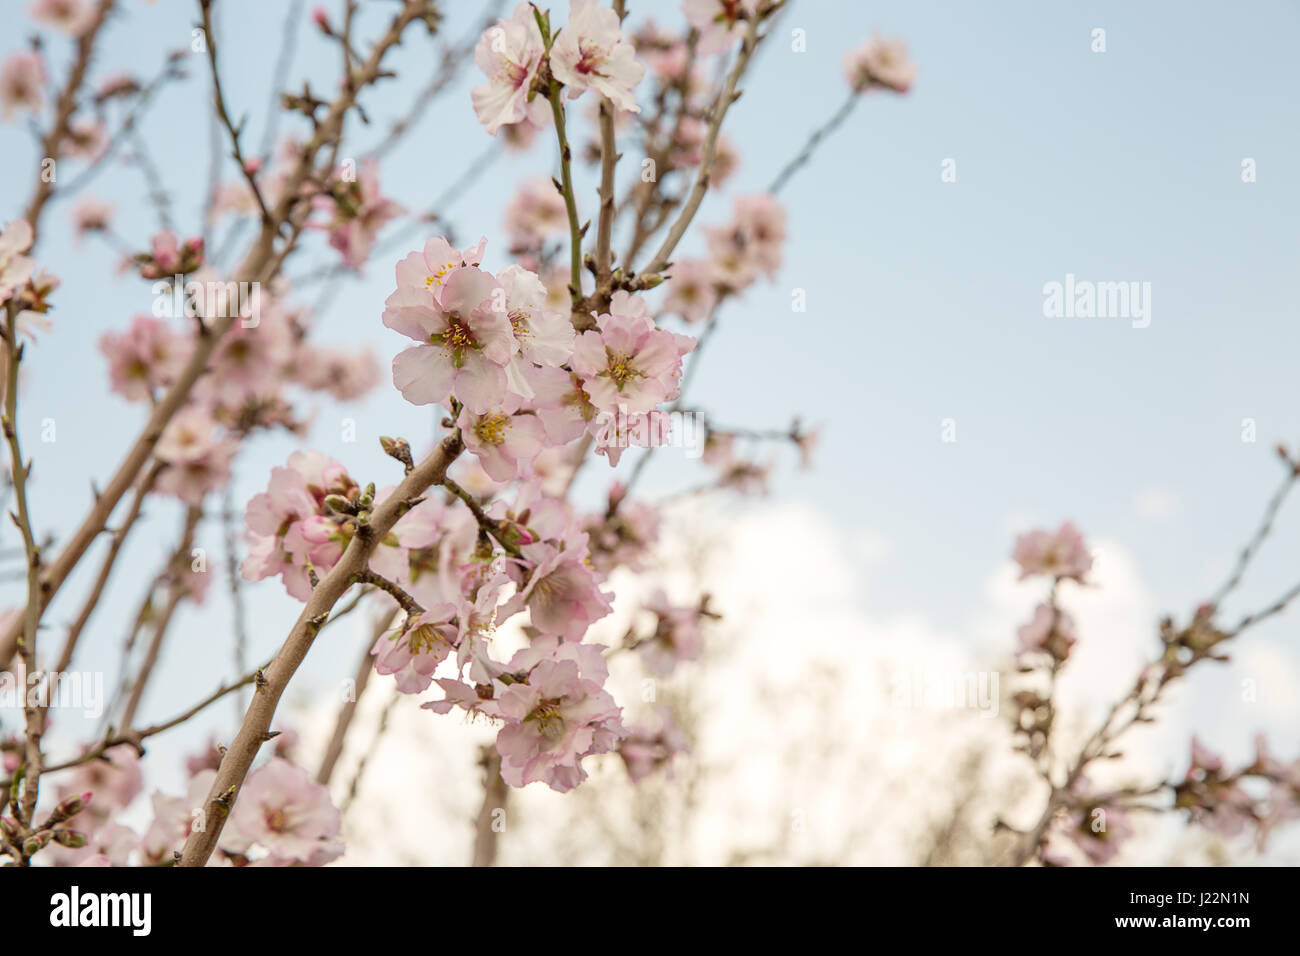 Beautiful photo of blooming almond trees in spring. Stock Photo